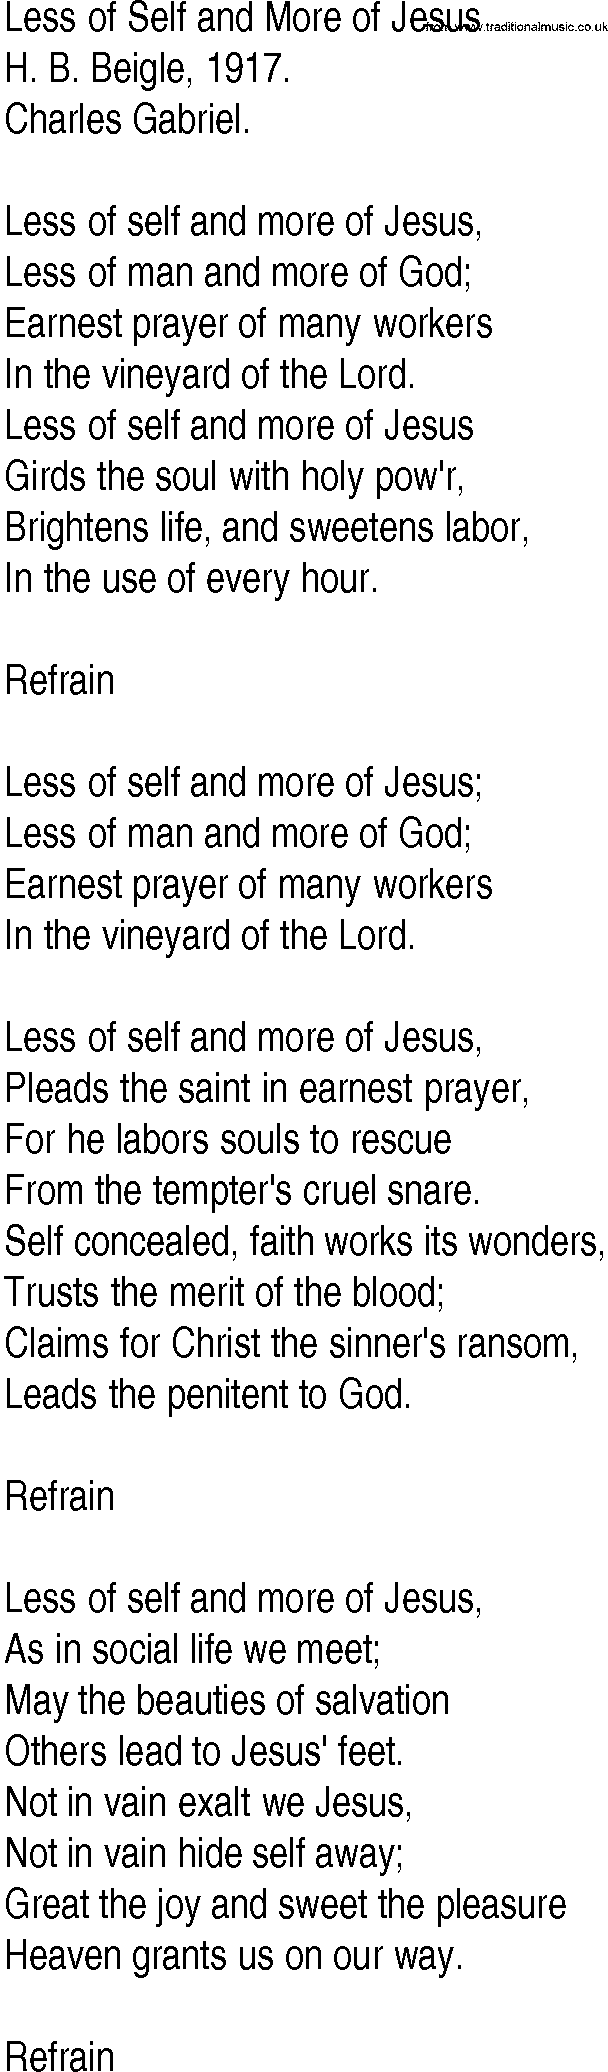 Hymn and Gospel Song: Less of Self and More of Jesus by H B Beigle lyrics